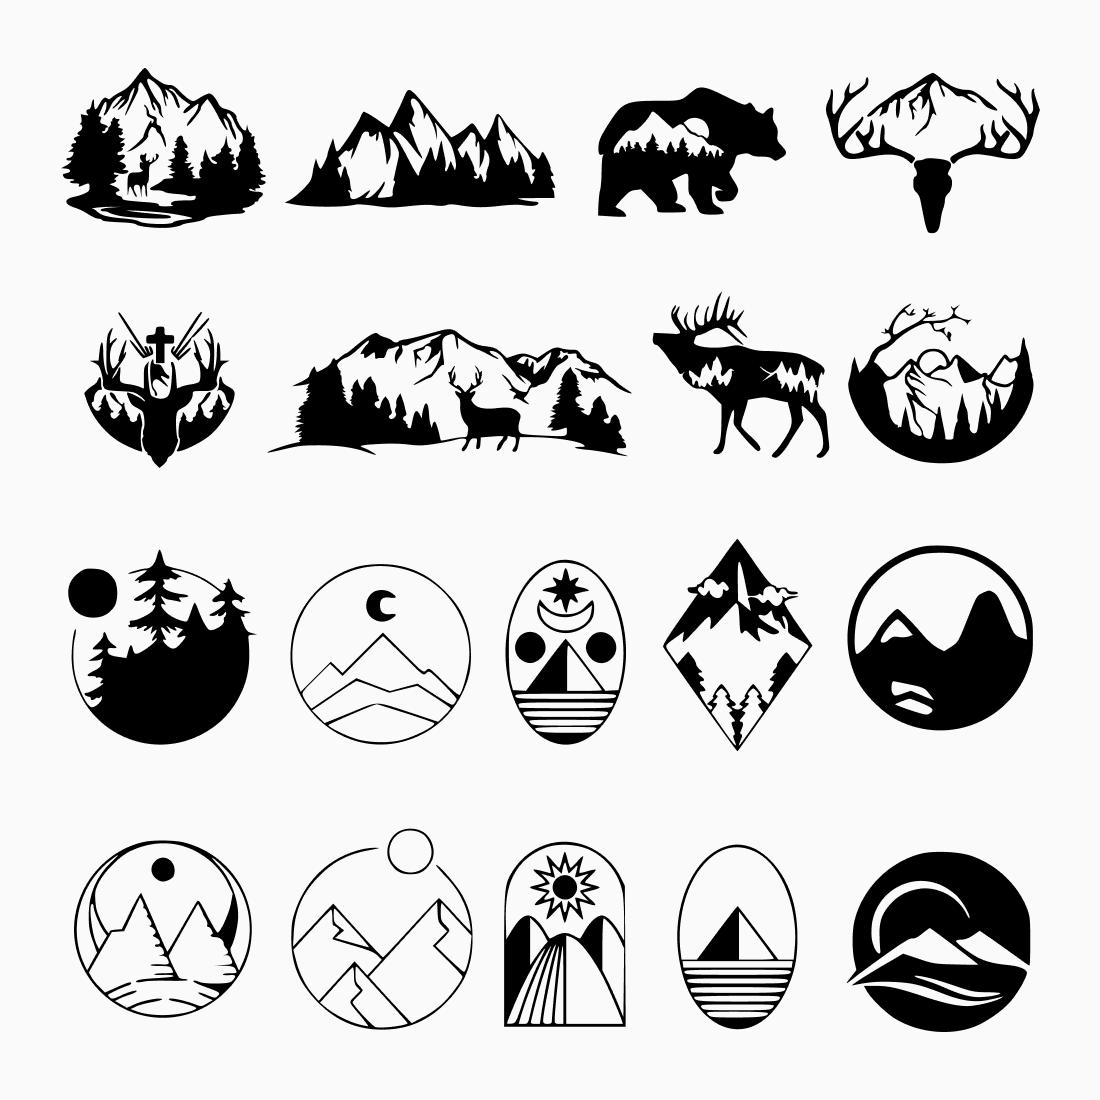 Logo of mountain forest and various animals.